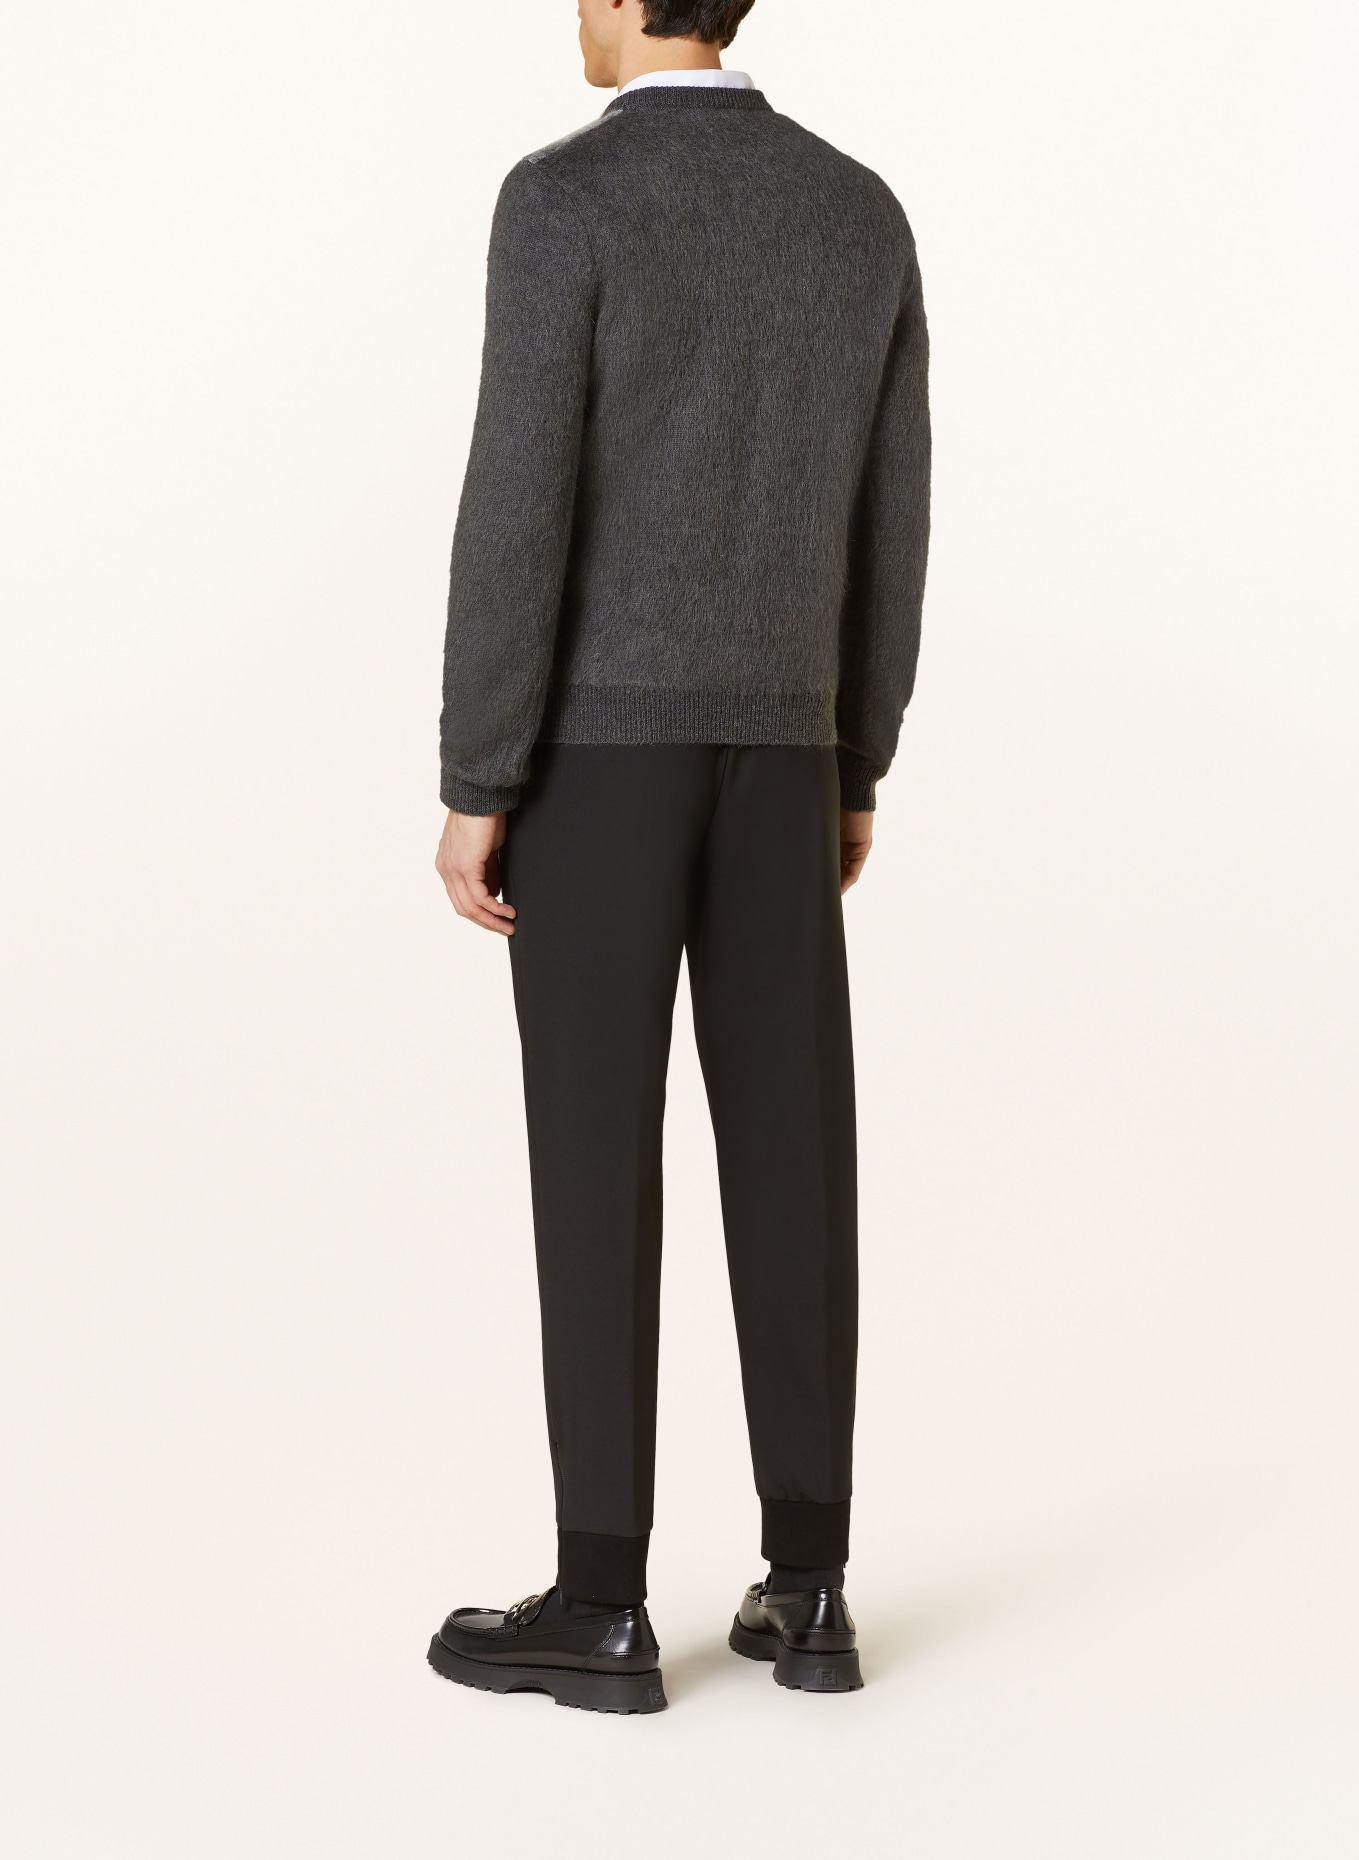 FENDI Pants in jogger style extra slim fit, Color: BLACK (Image 3)